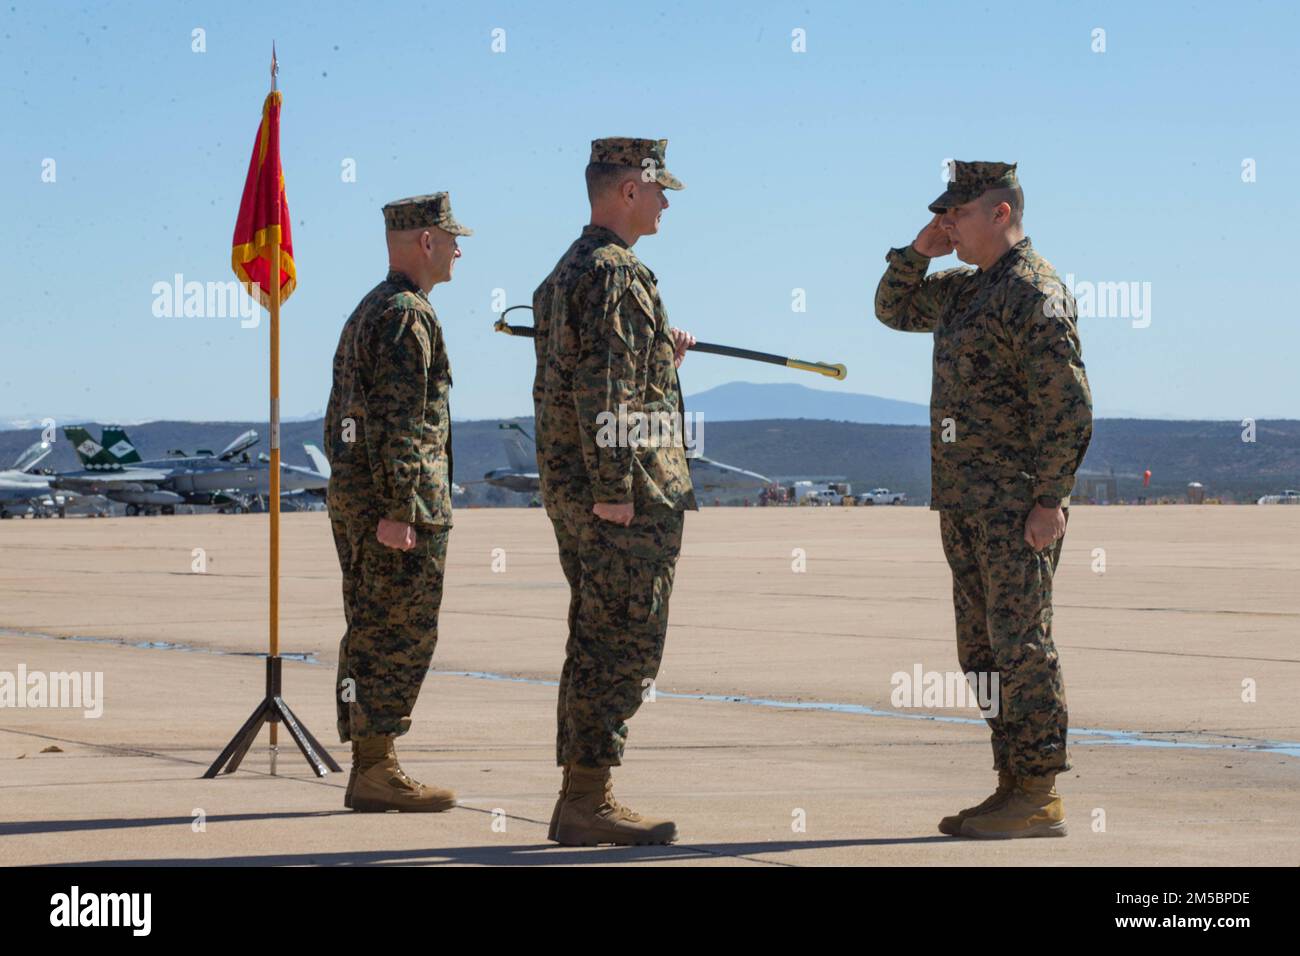 U.S. Marine Corps Sgt. Maj. Gerardo C. Ybarra, right, incoming sergeant major of Marine Air Control Group (MACG) 38, 3rd Marine Aircraft Wing, salutes Col. Jeremy S. Winters, center, commanding officer of MACG-38, before exchanging the noncommissioned officer sword during a relief and appointment ceremony on Marine Corps Air Station Miramar, California, Feb 24, 2022. A relief and appointment ceremony is a time-honored tradition, which formally signifies the transfer of responsibility and entails the total accountability and authority from one individual to another. Stock Photo